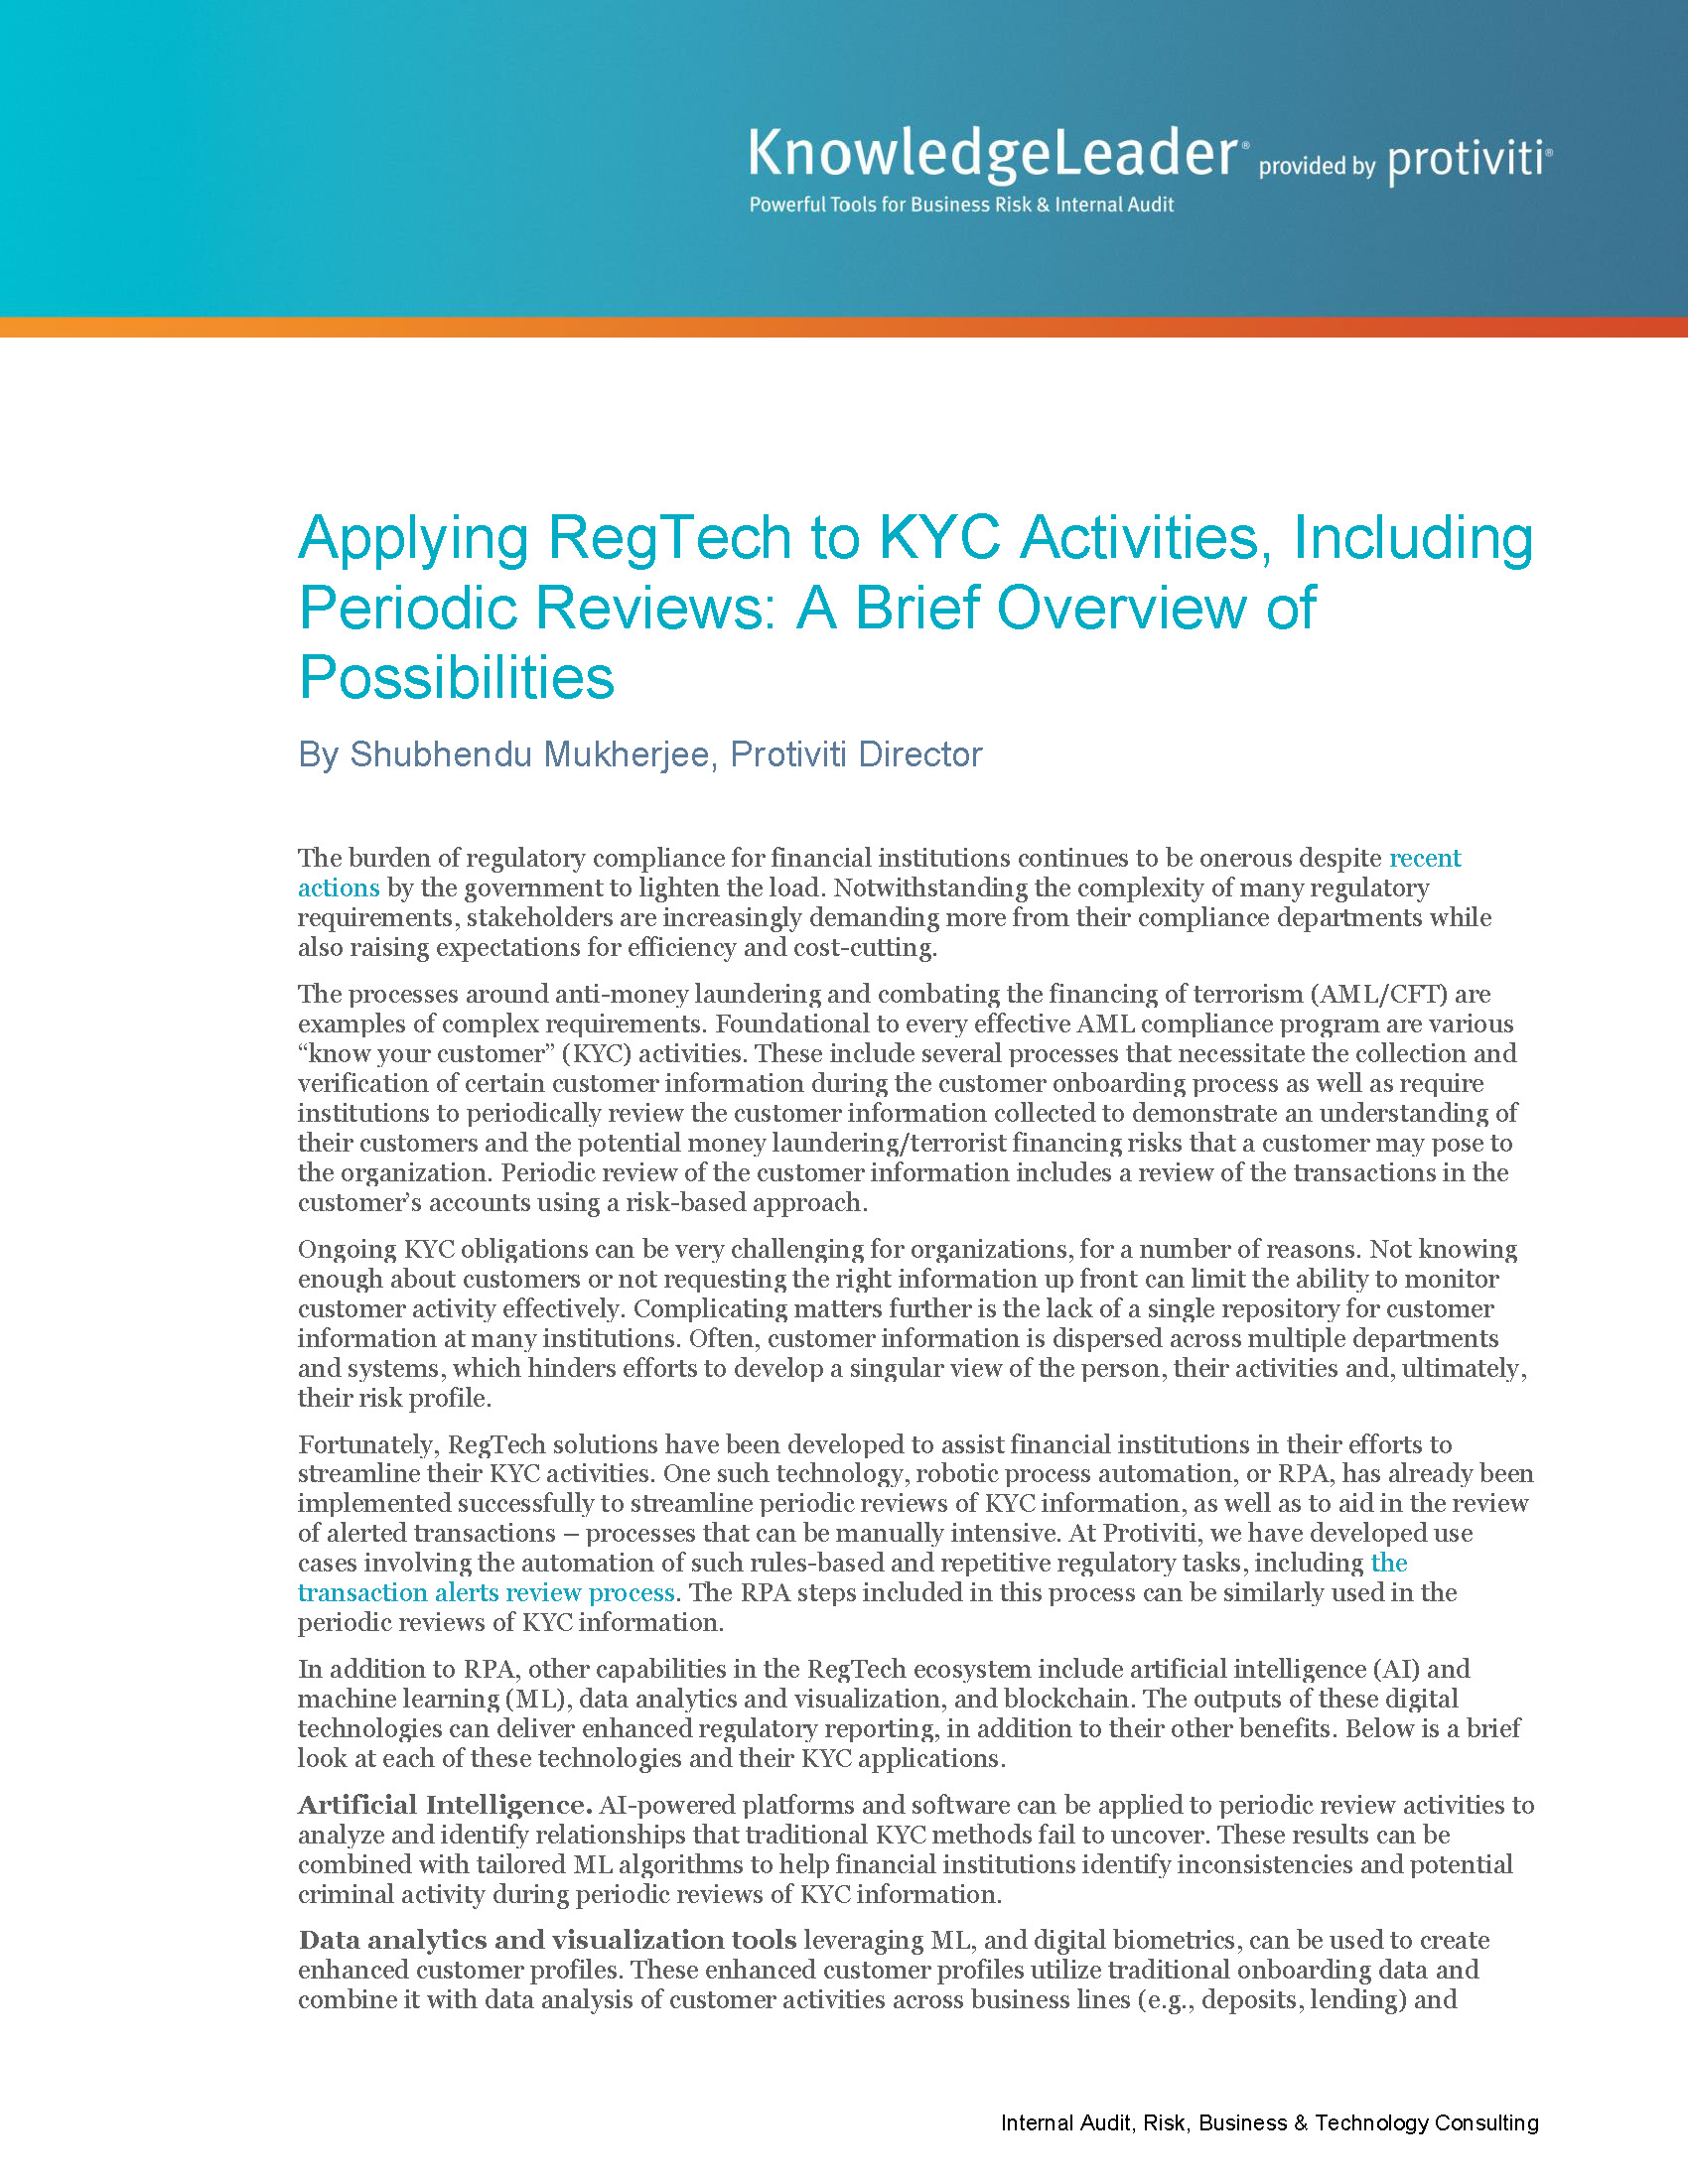 Screenshot of the first page of Applying RegTech to KYC Activities, Including Periodic Reviews A Brief Overview of Possibilities